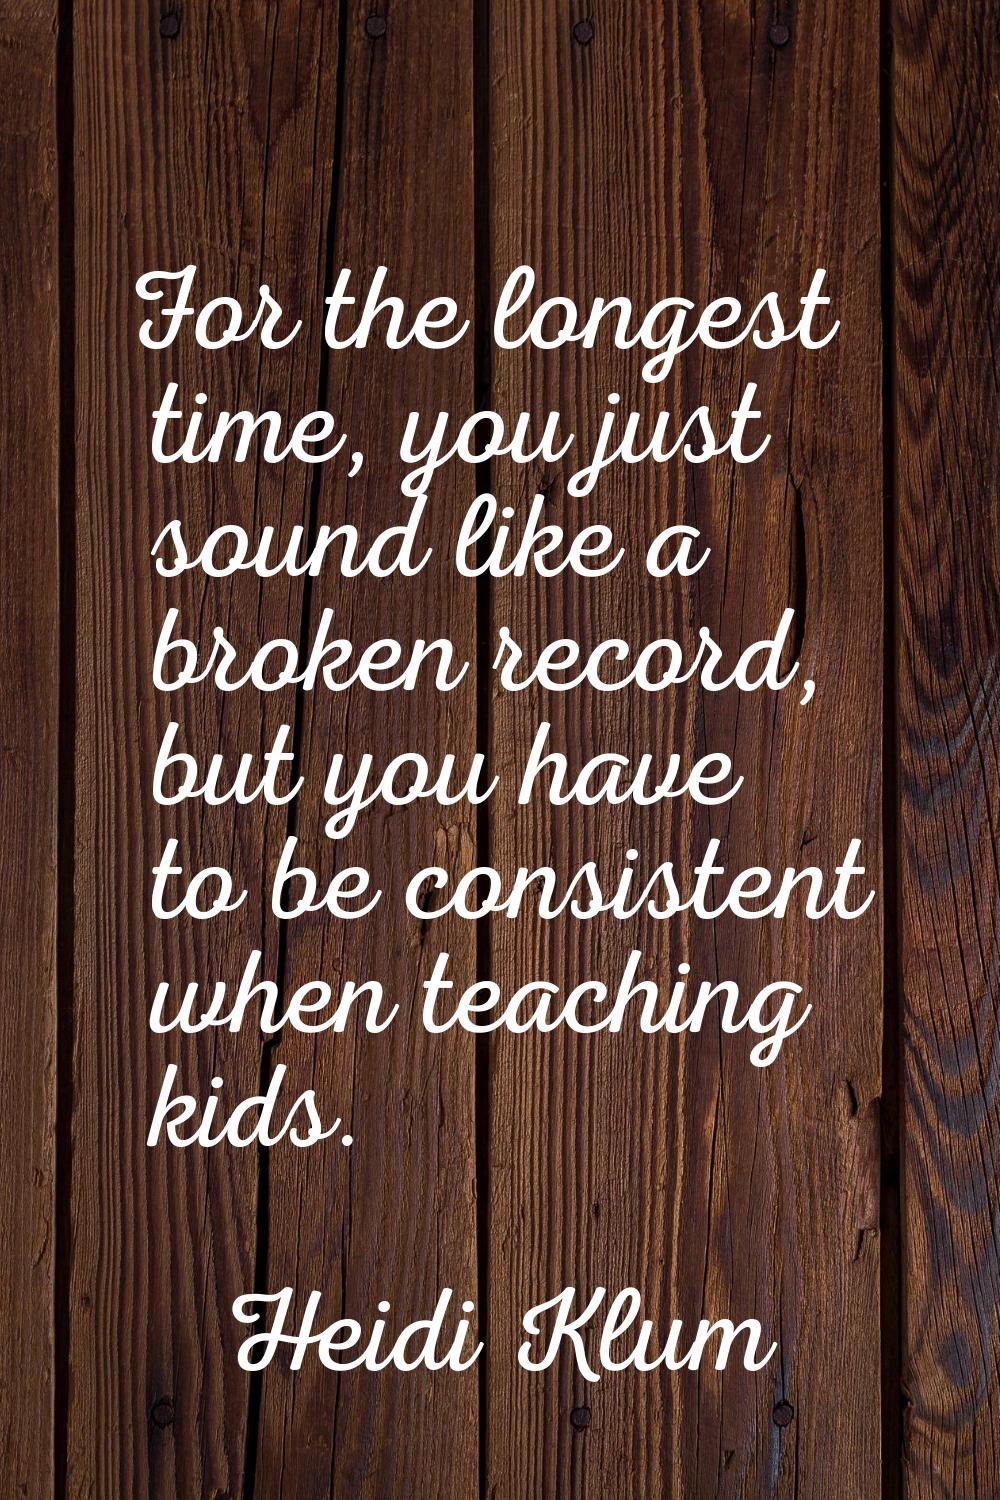 For the longest time, you just sound like a broken record, but you have to be consistent when teach